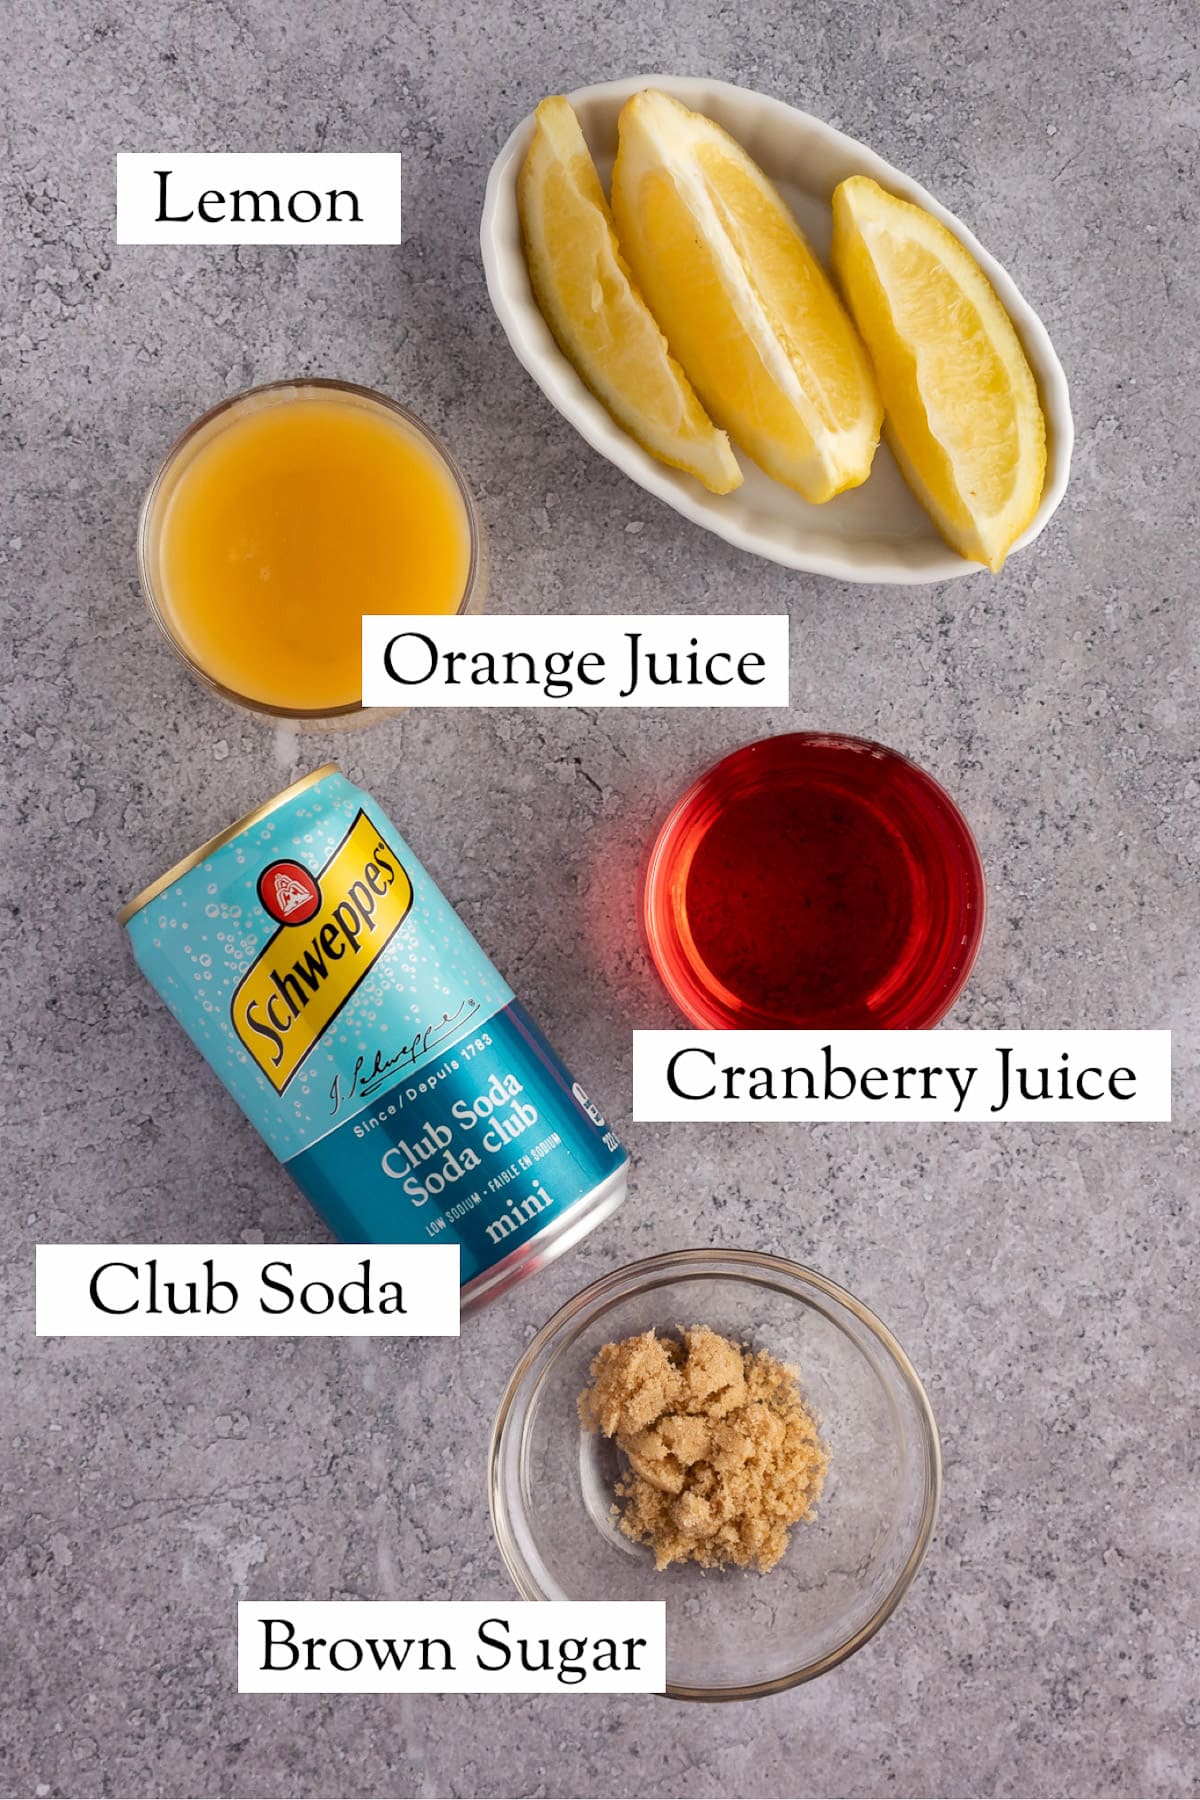 Overhead view of the ingredients needed to make this drink.